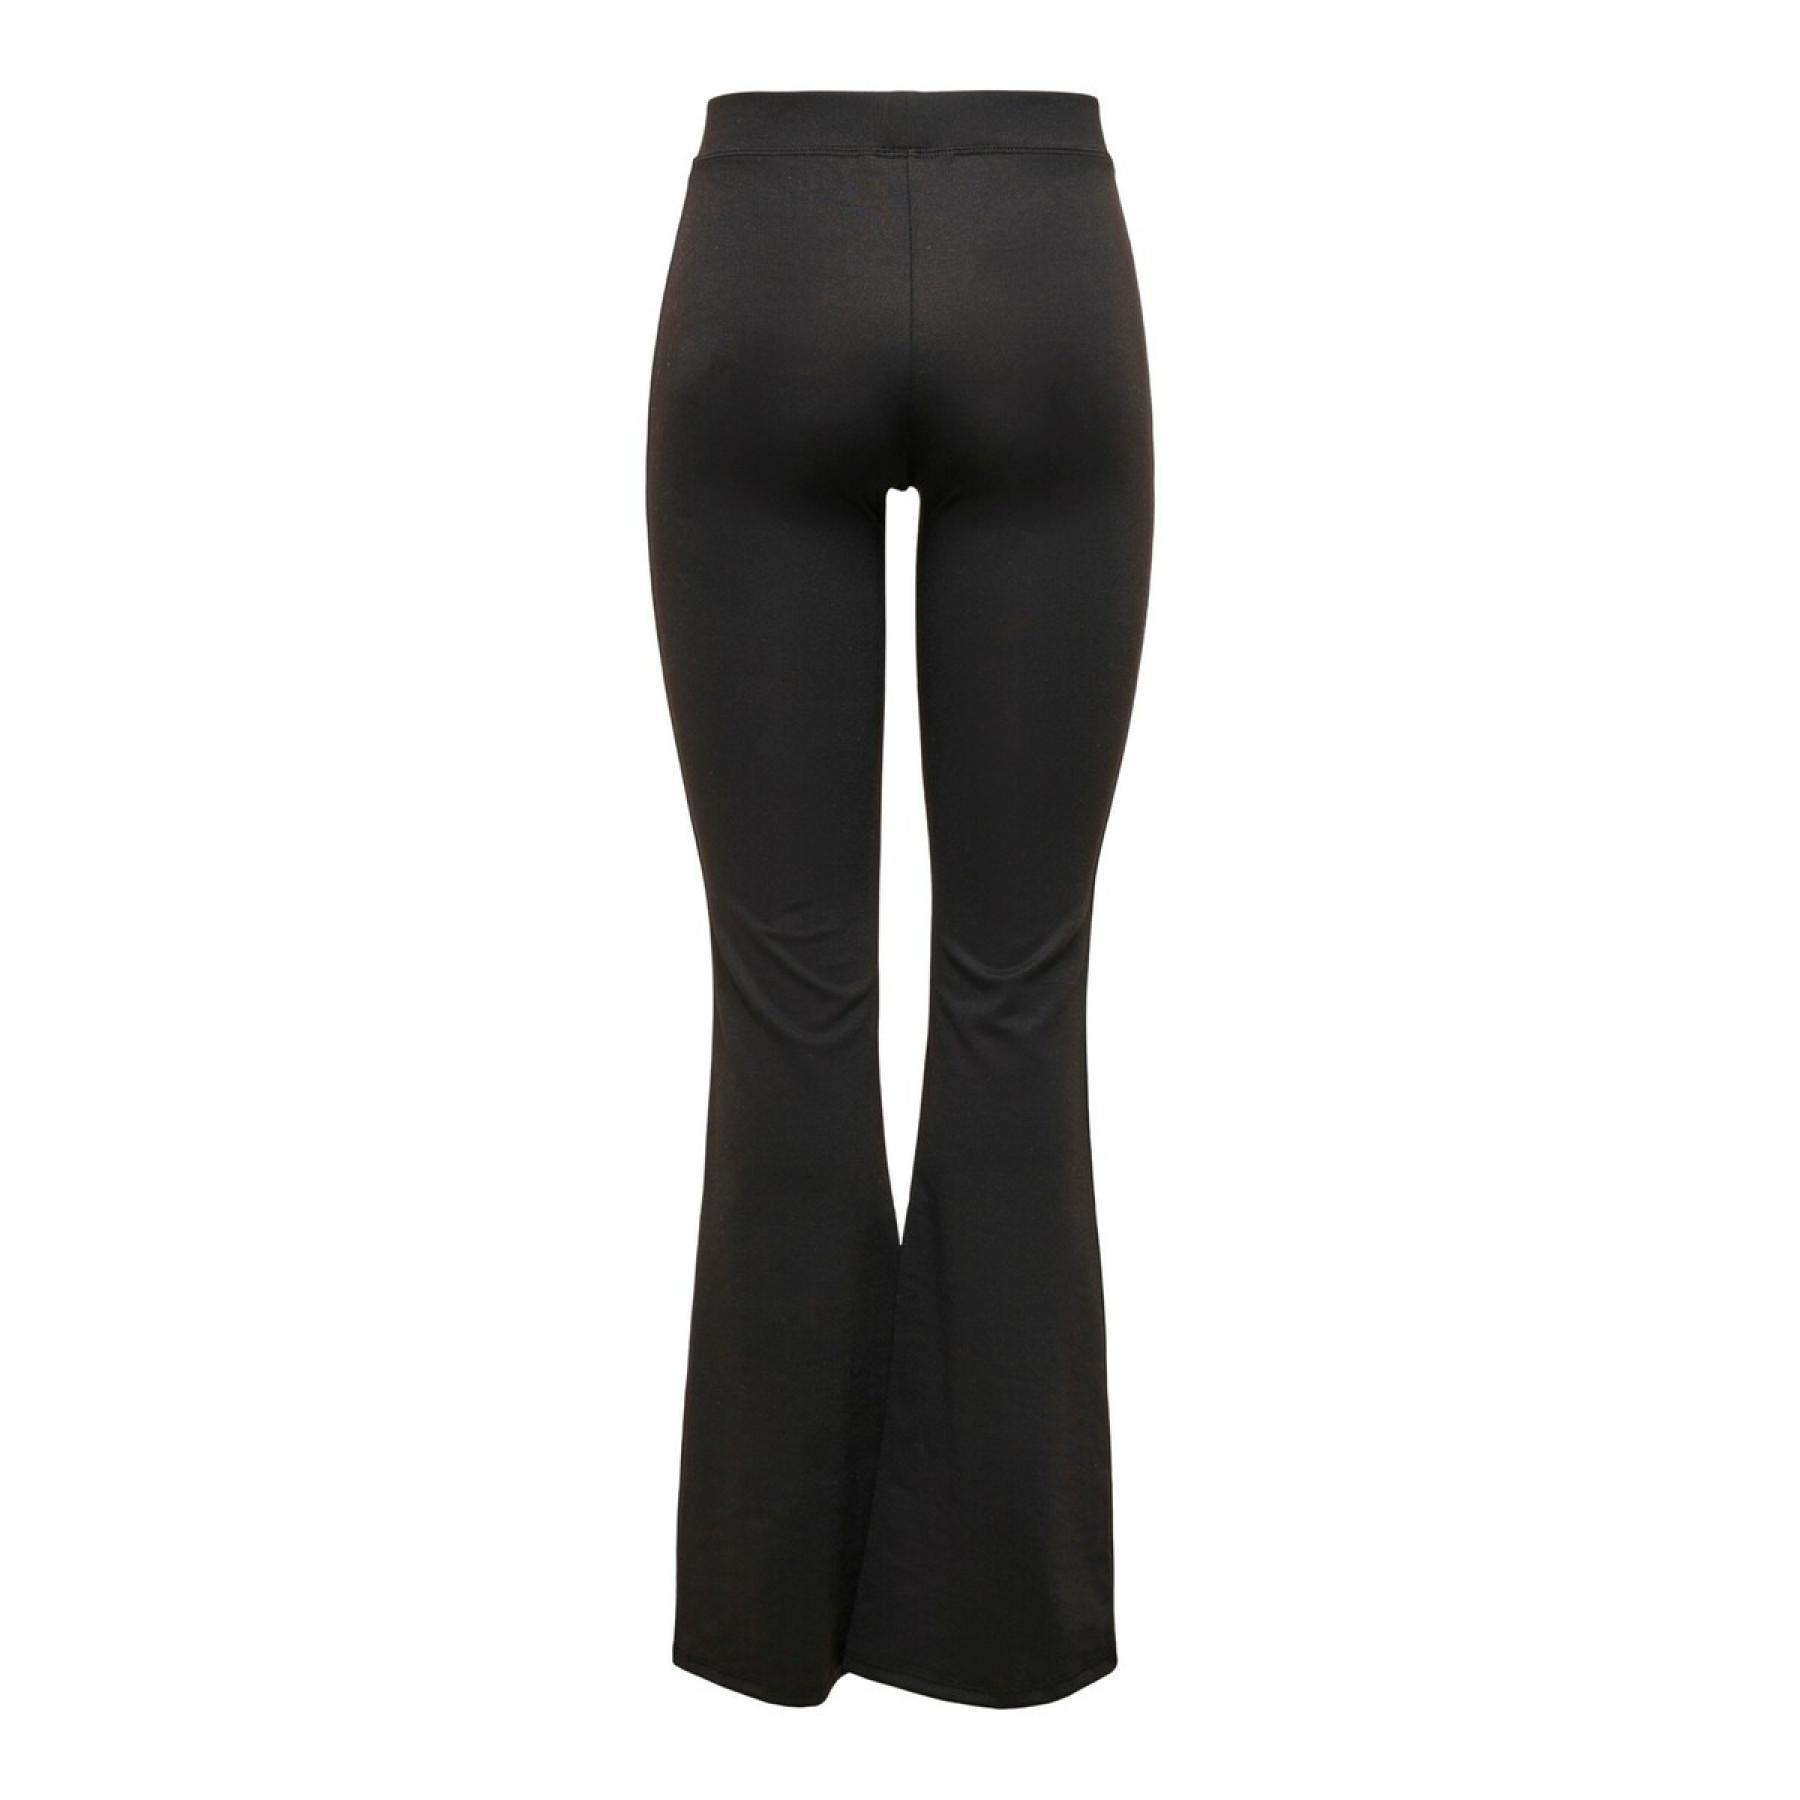 Pantalon femme Only Fever stretch flaired